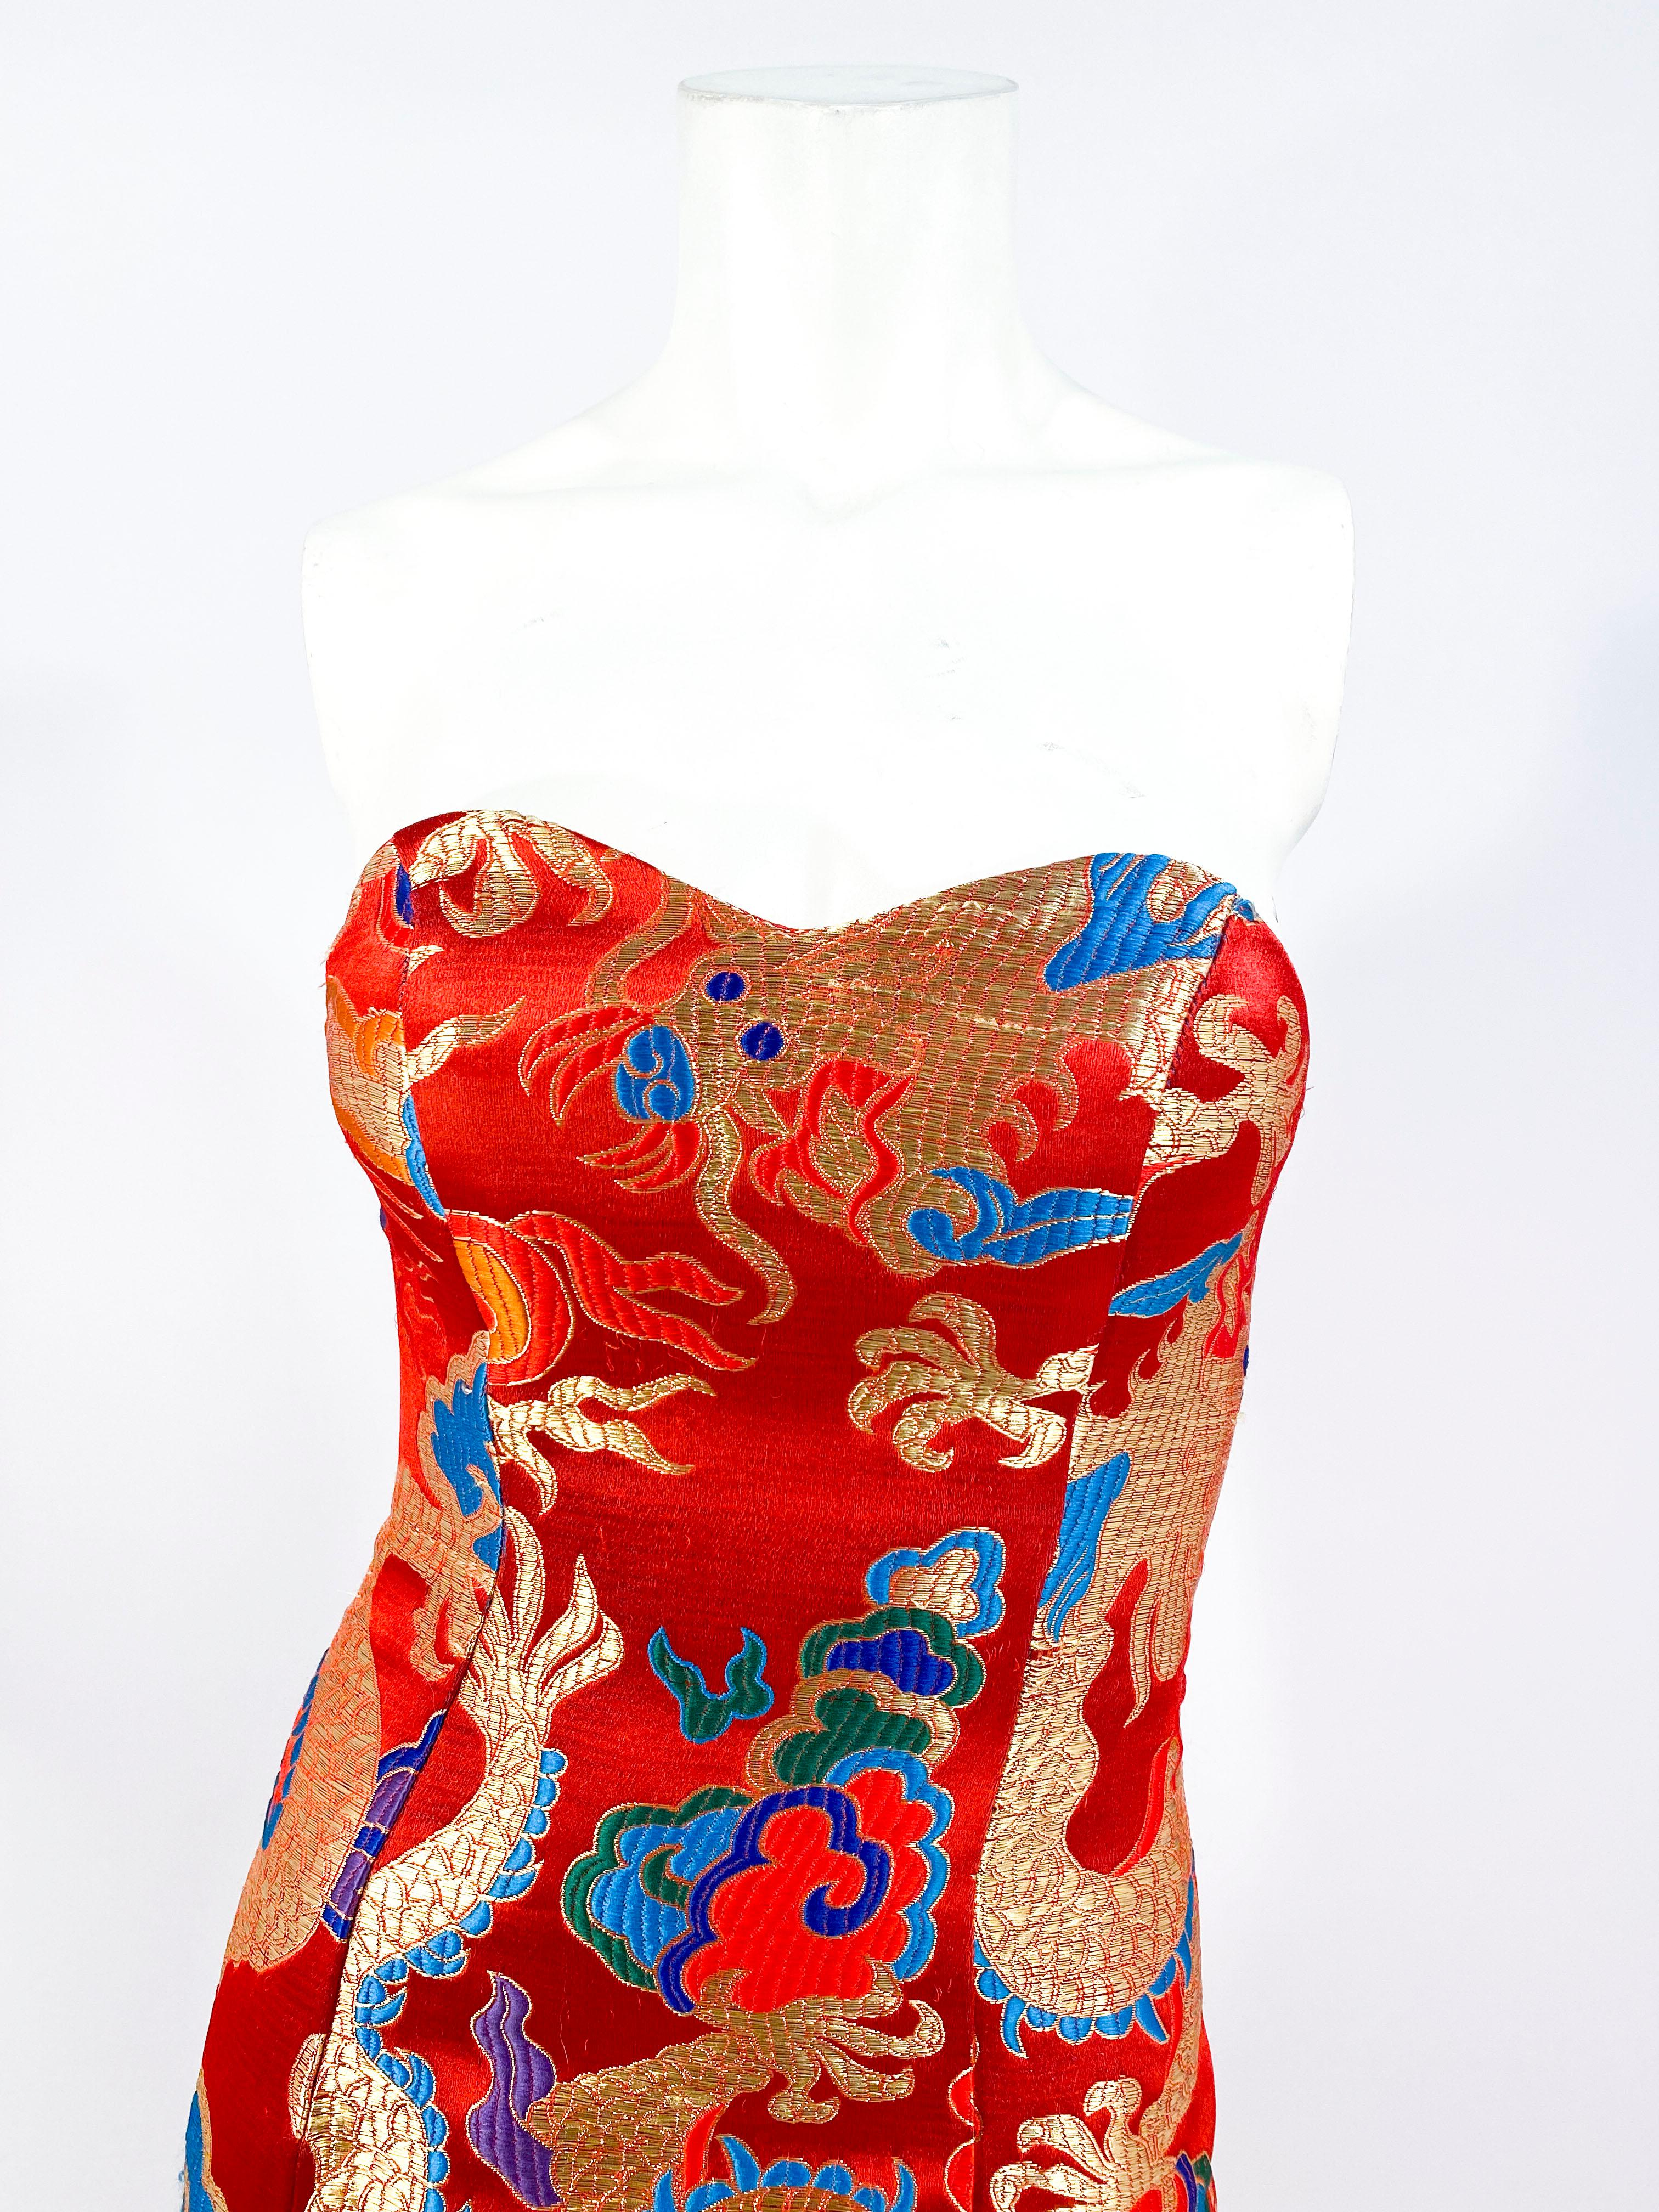 1980s custom made strapless gown with fishtail and train. Made of vintage kimono fabric in red featuring a brilliant gold dragon motif with jewel-tone accents. The bodice is sculpted for support. The tie-up closure is located on the back of the